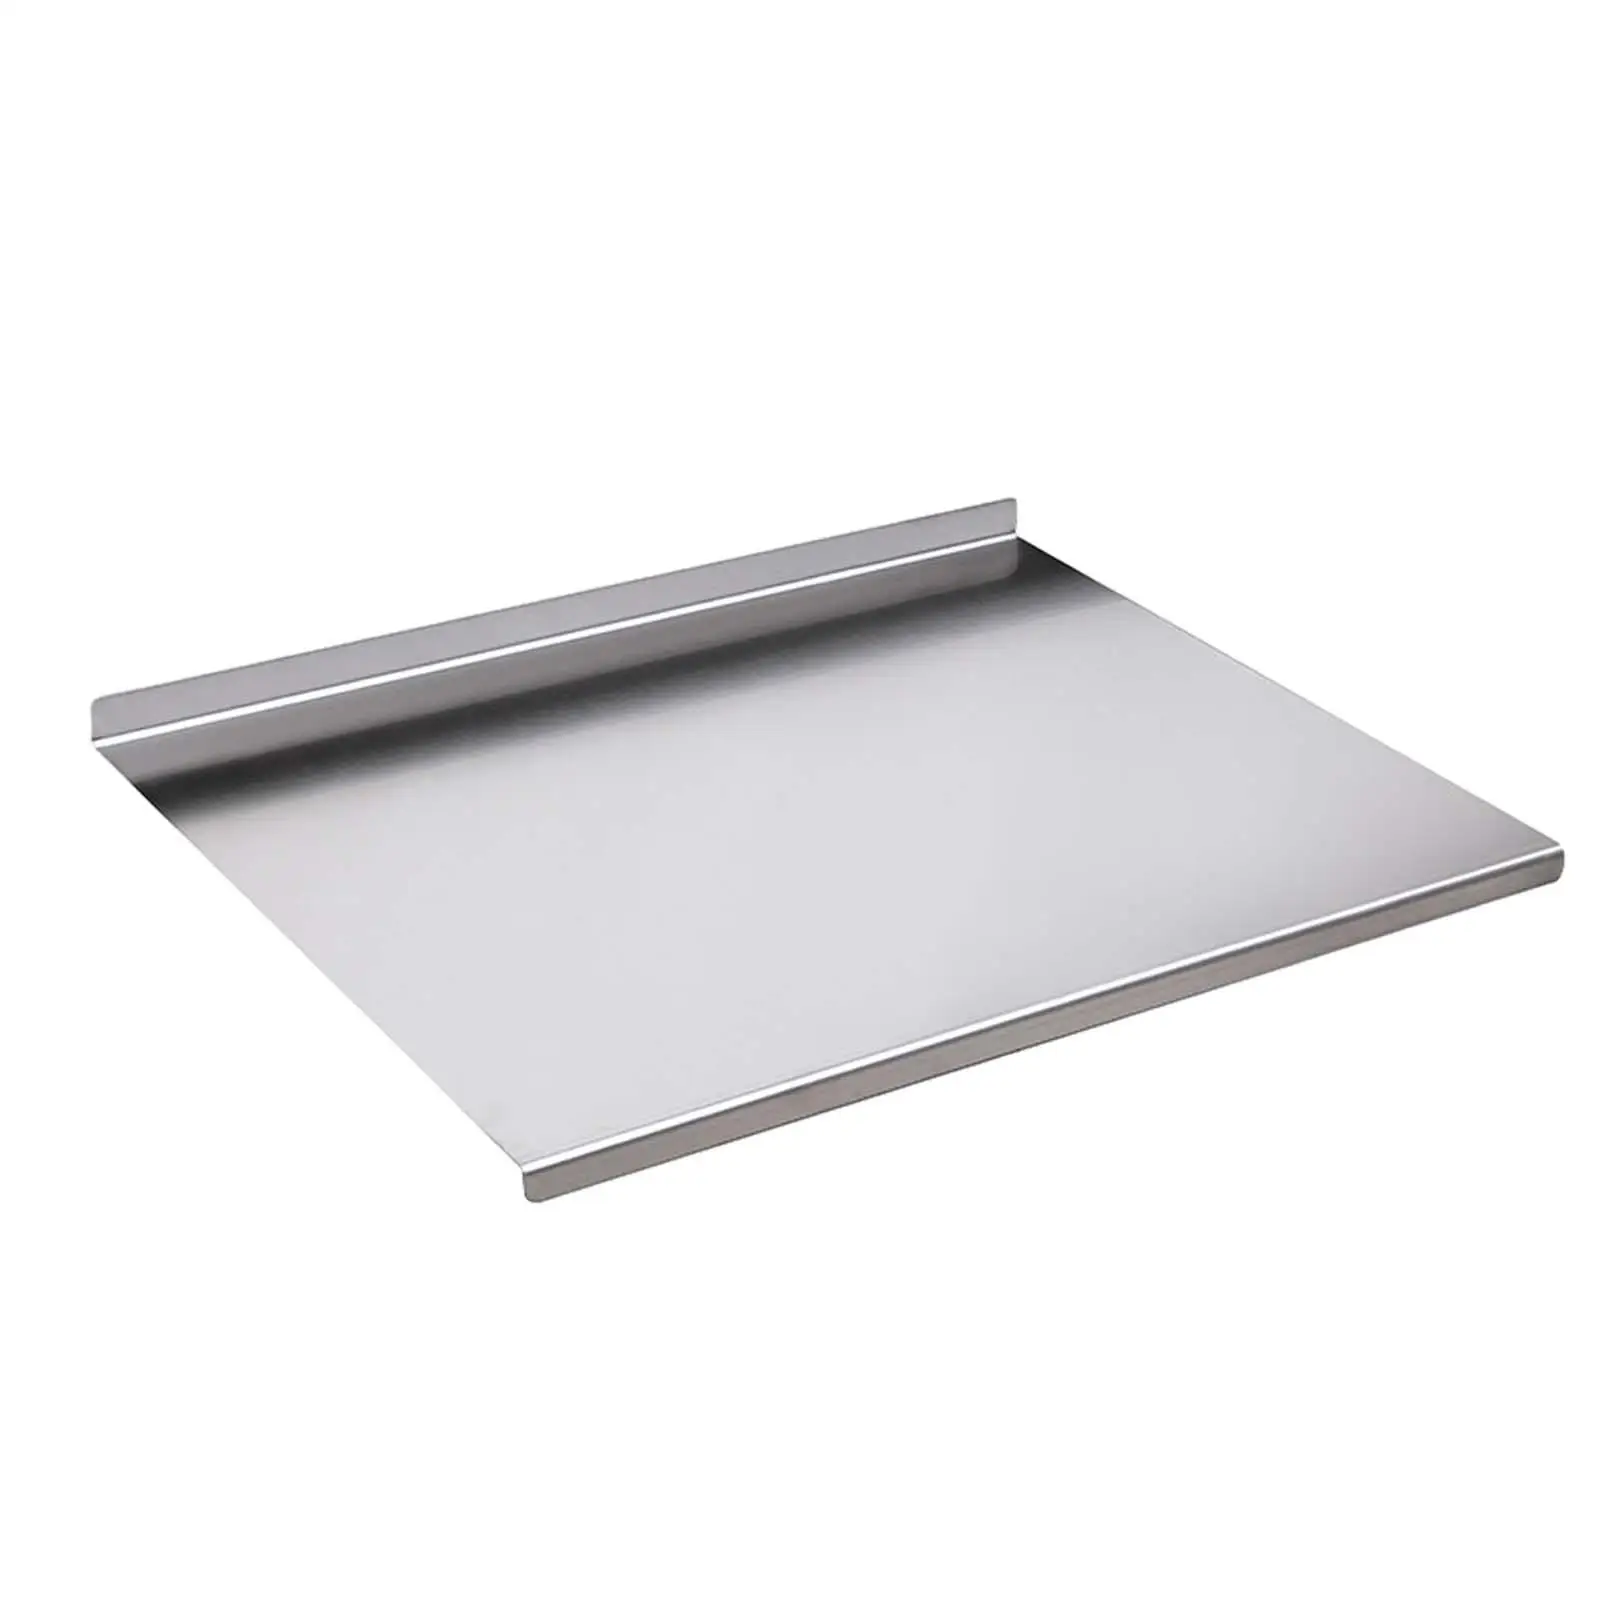 Stainless Steel Chopping Board Pastry Board Large Pizza Biscuits Board Thick